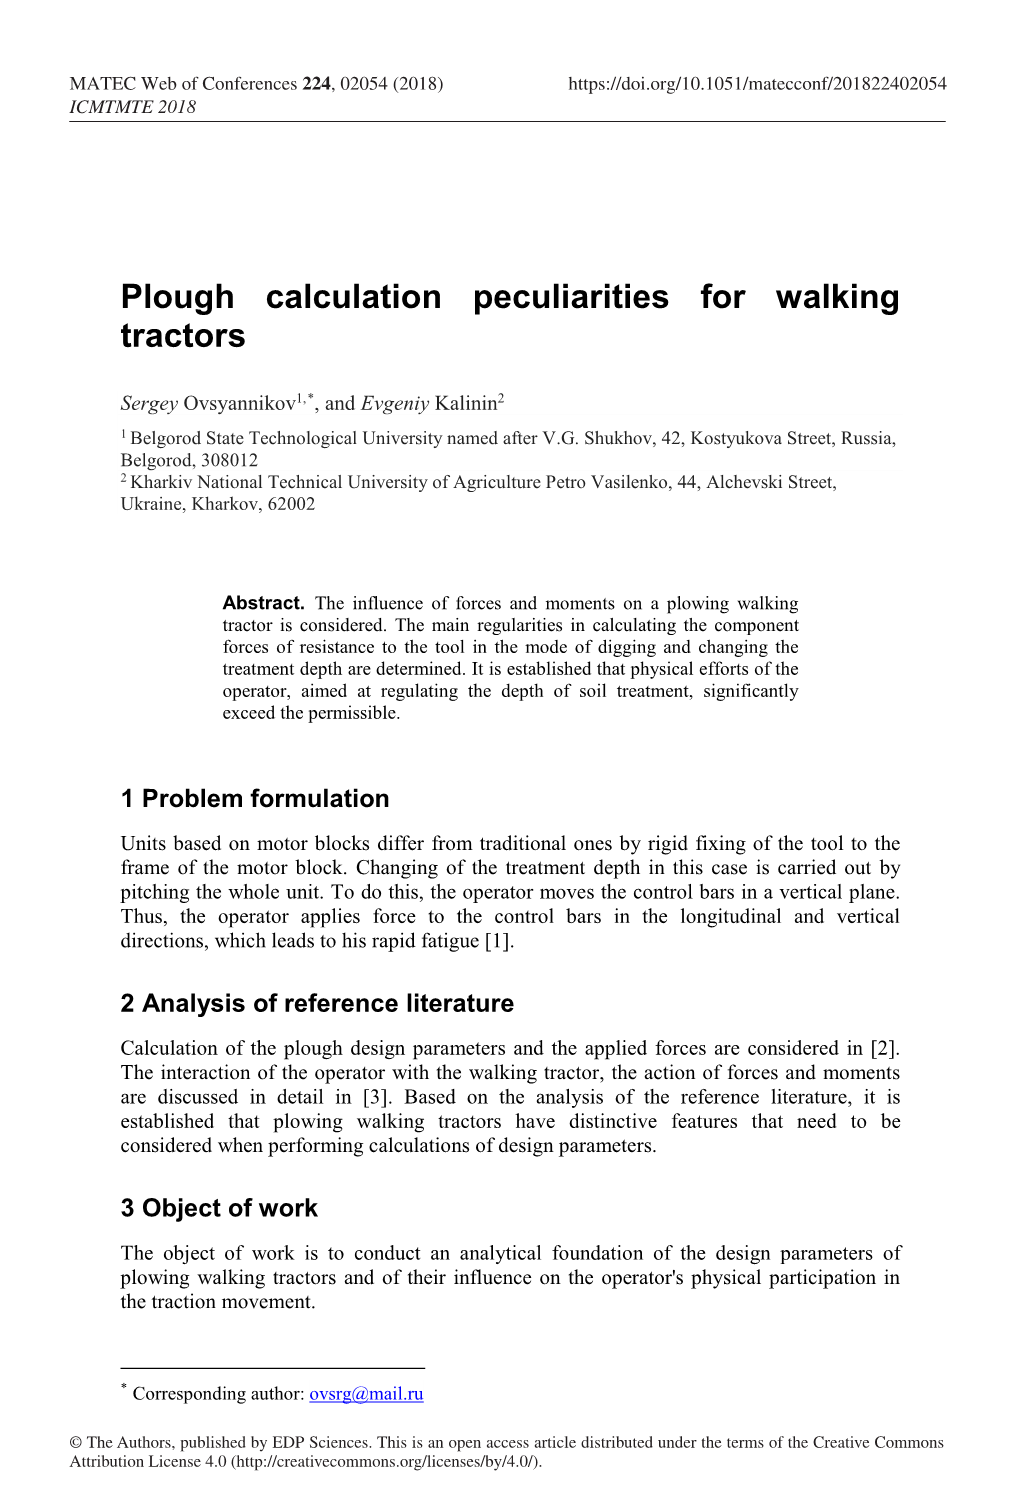 Plough Calculation Peculiarities for Walking Tractors